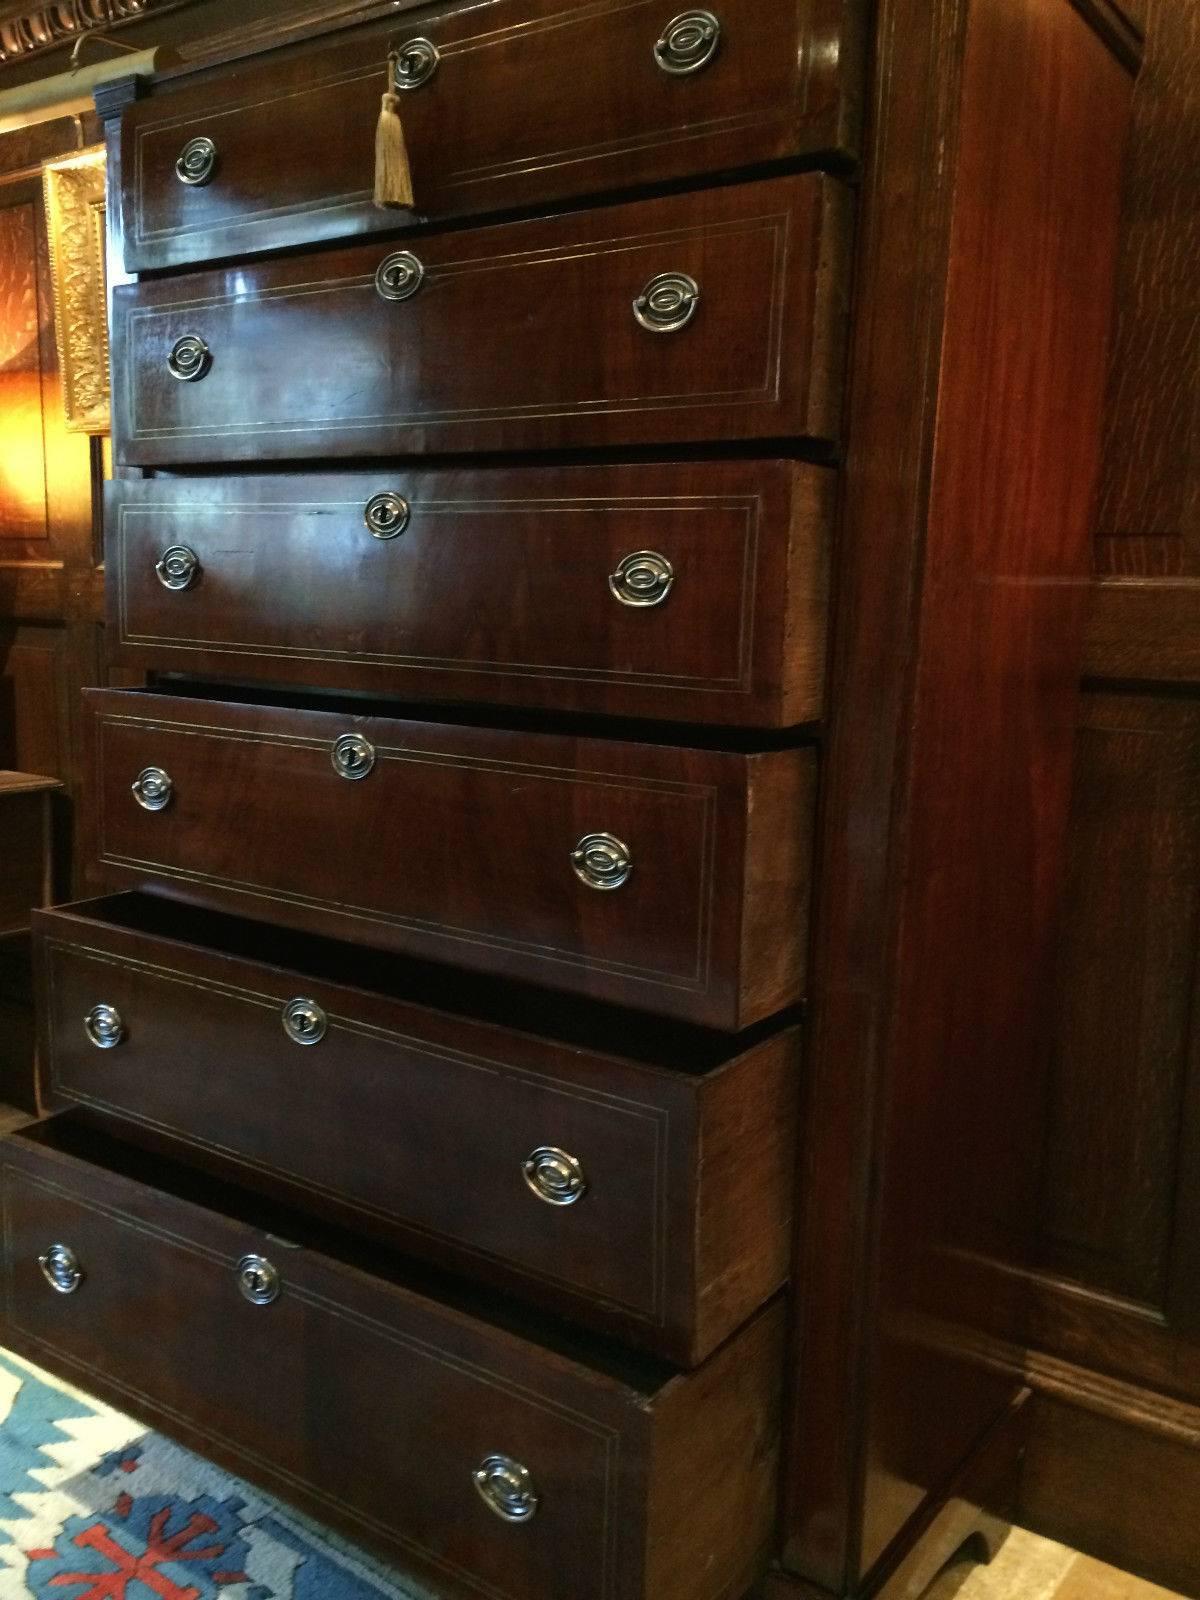 A 19th century antique George III flame fronted mahogany ‘tallboy' chest of drawers dresser, rectangular top over six brass strung inlay to the front of graduated drawers, original oval brass drop handles and brass escutcheons, comes with one